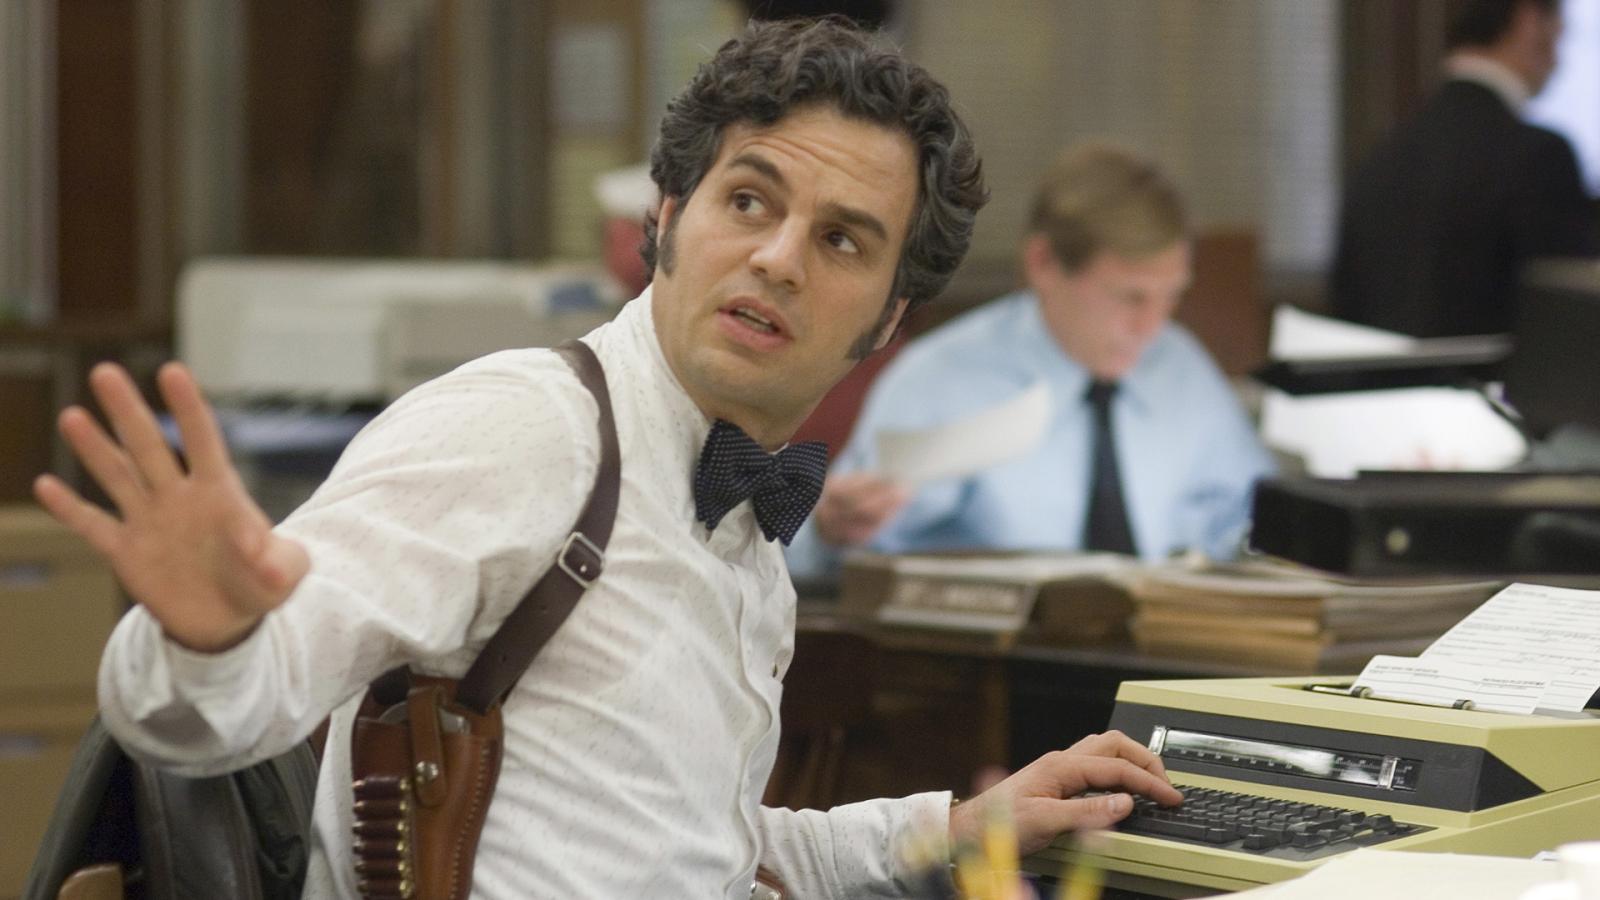 15 Underrated Mark Ruffalo Movies That Deserve More Credit - image 5